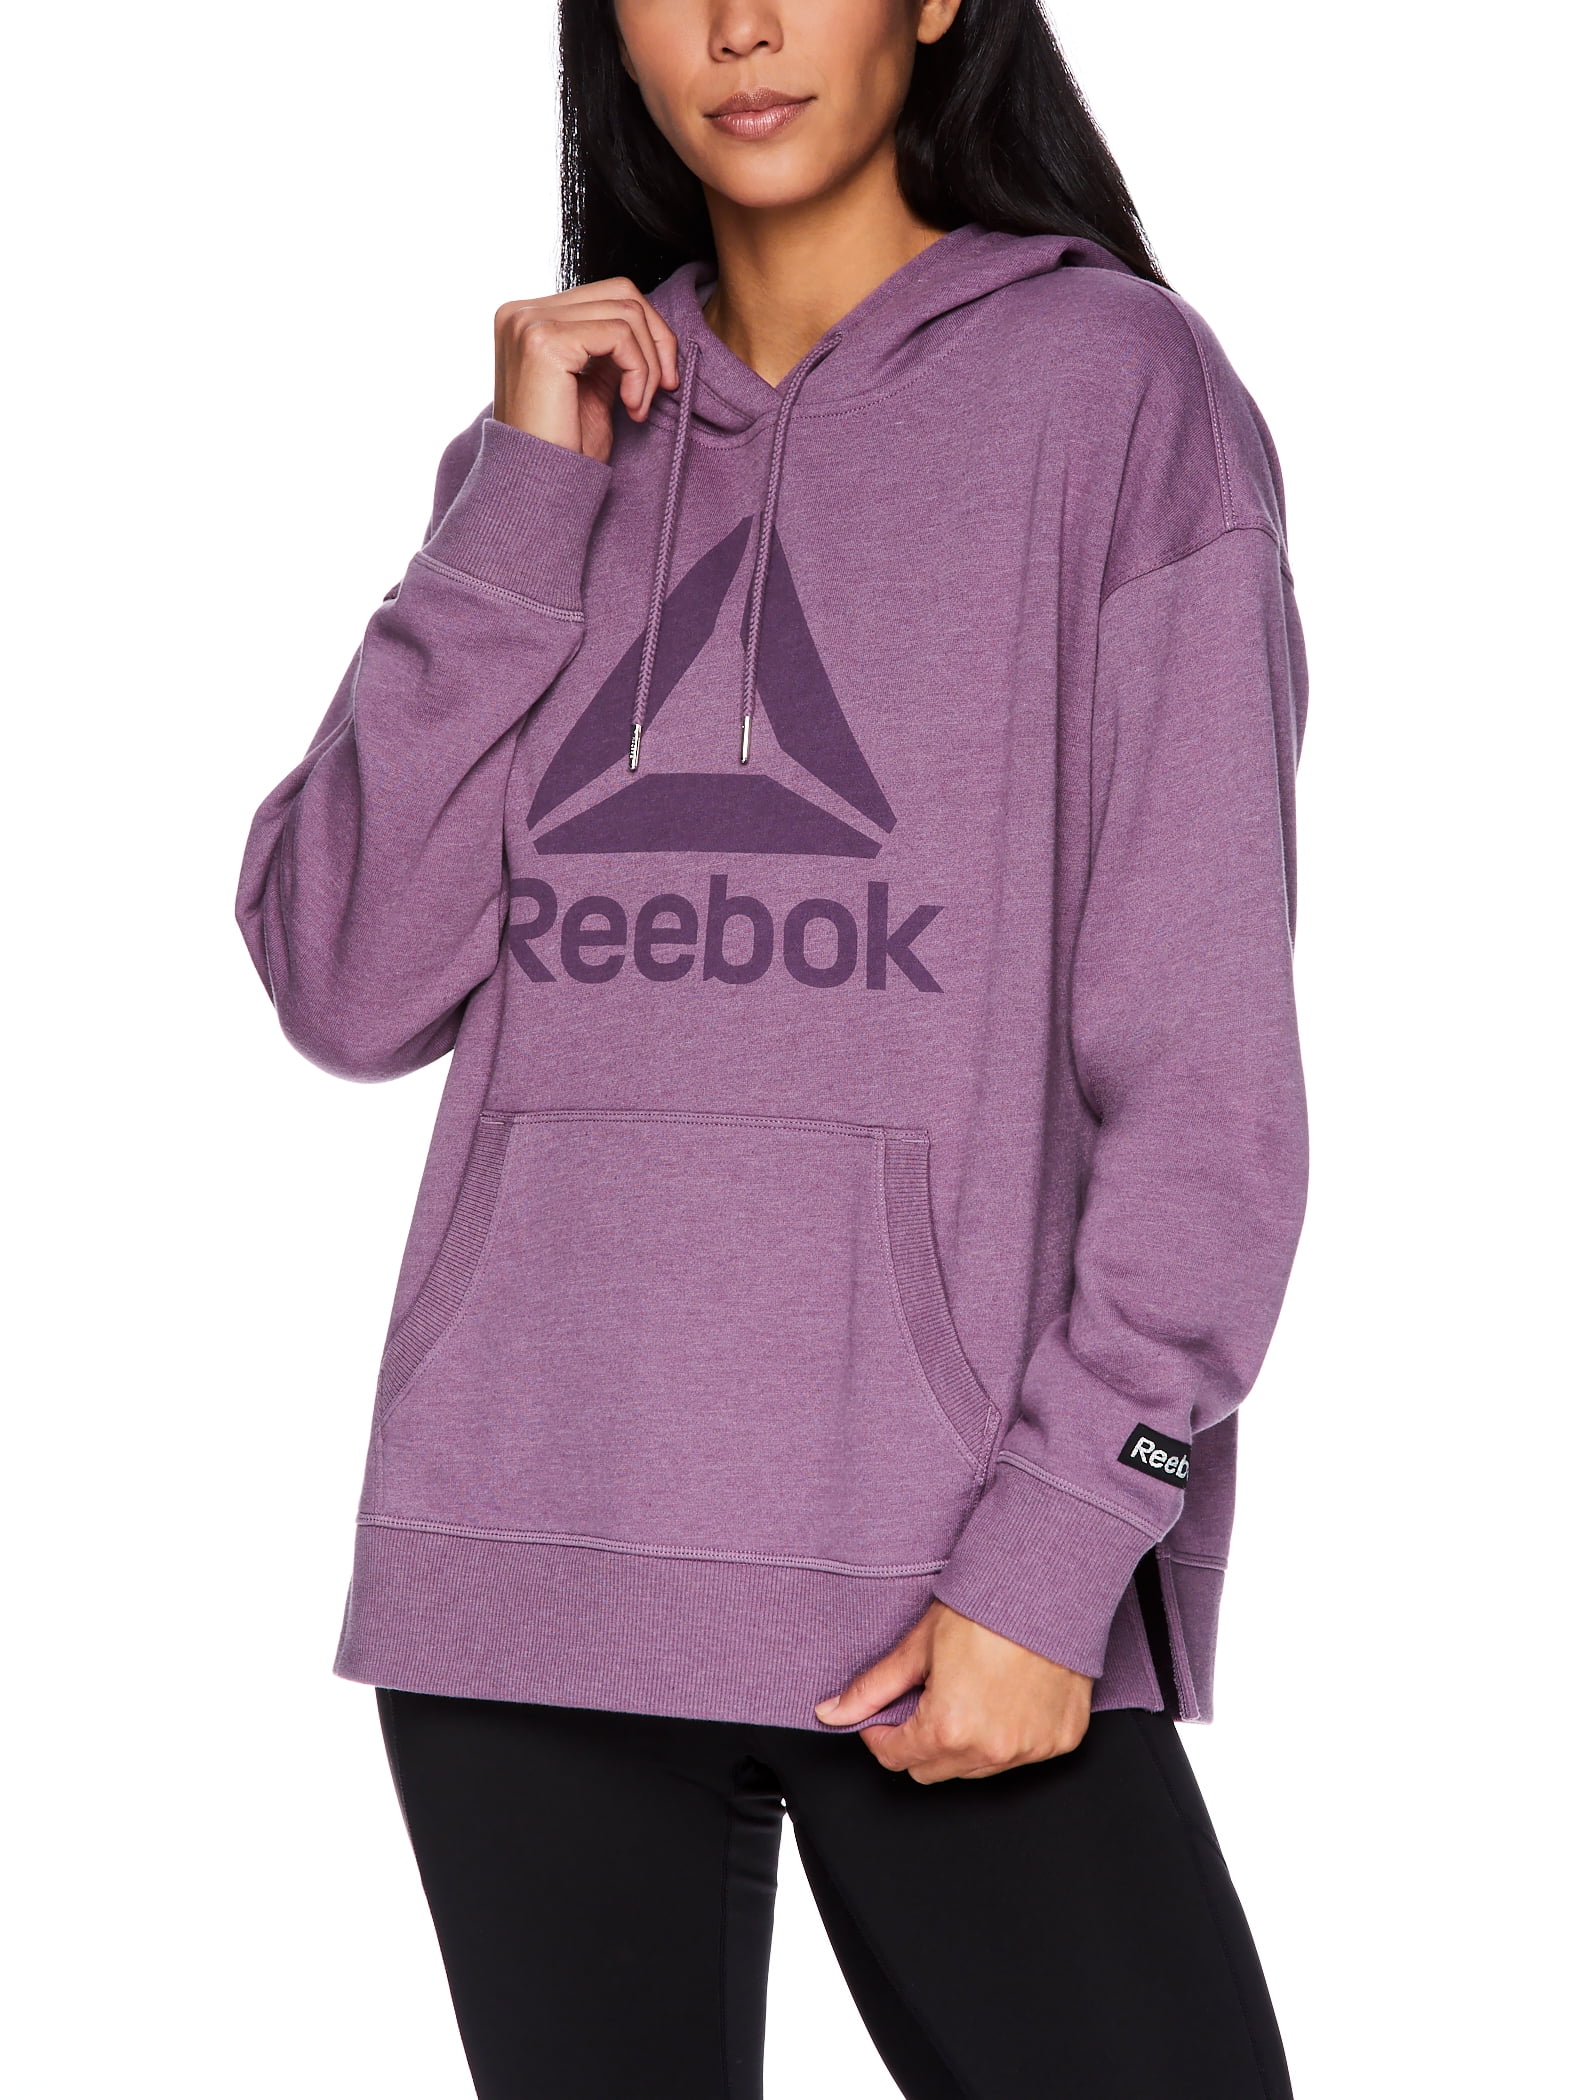 Reebok Women's Elite Cozy Graphic Hoodie with Drawstring and Pockets ...